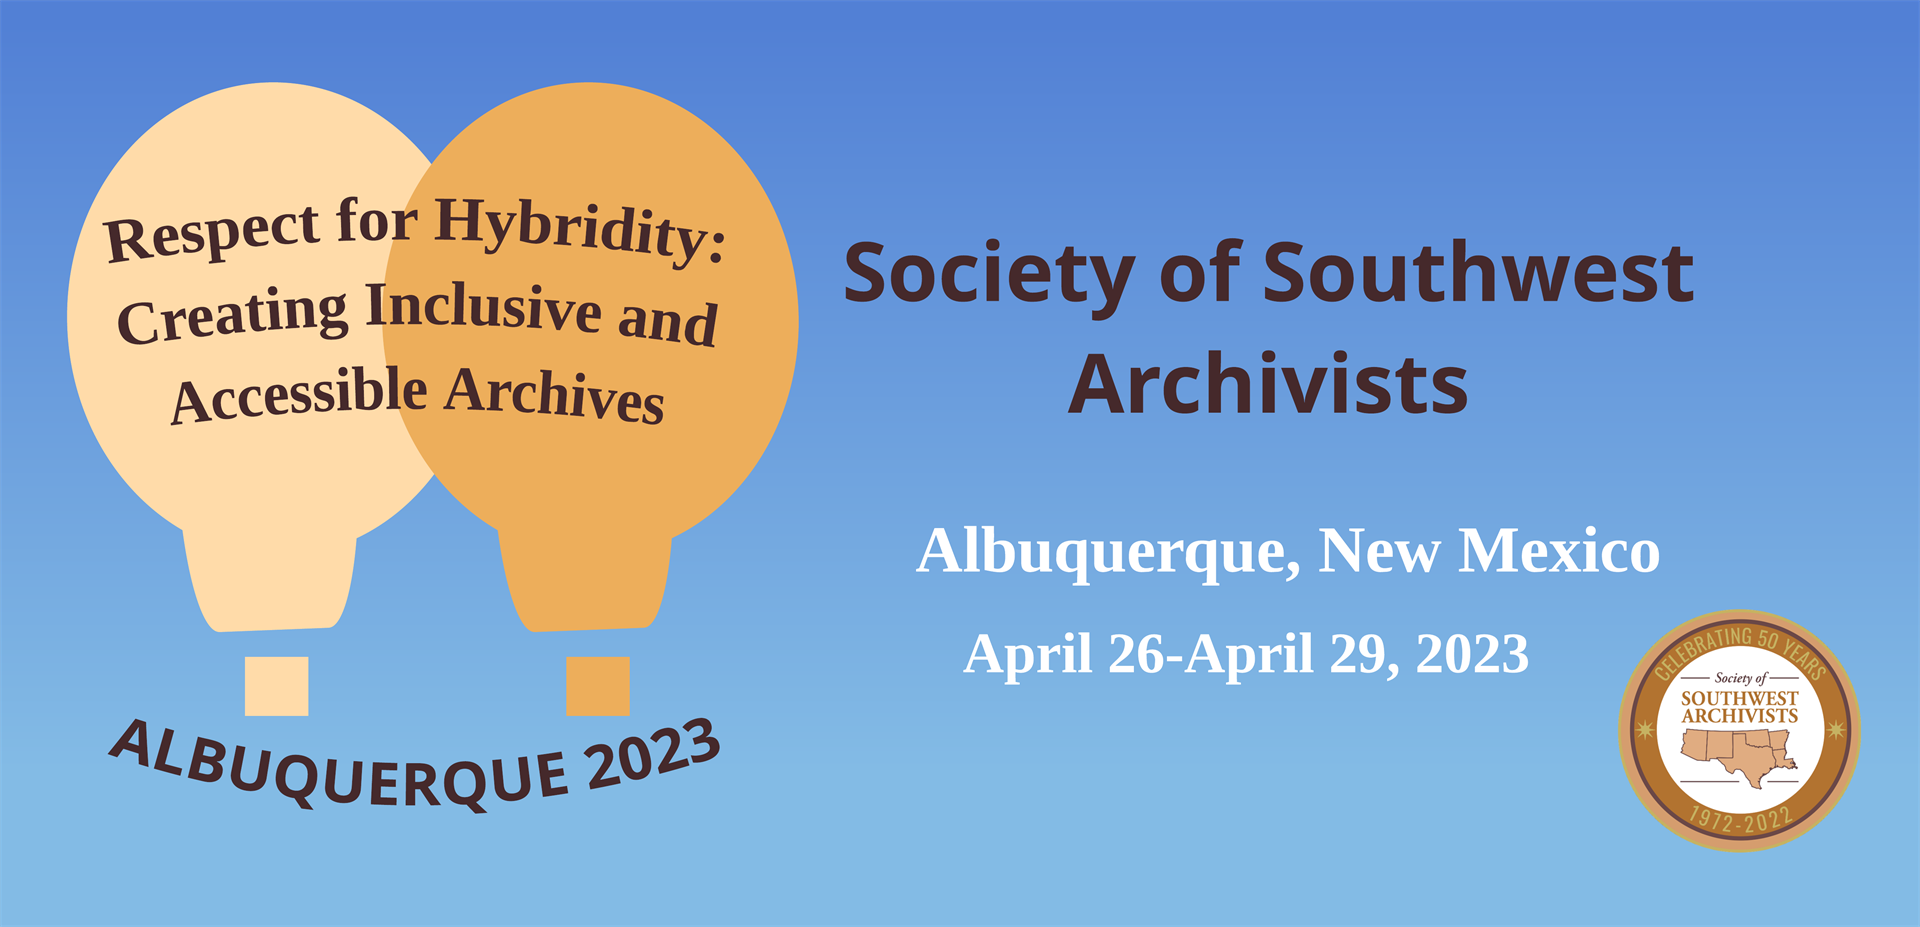 Society of Southwest Archivists 2023 Annual Meeting